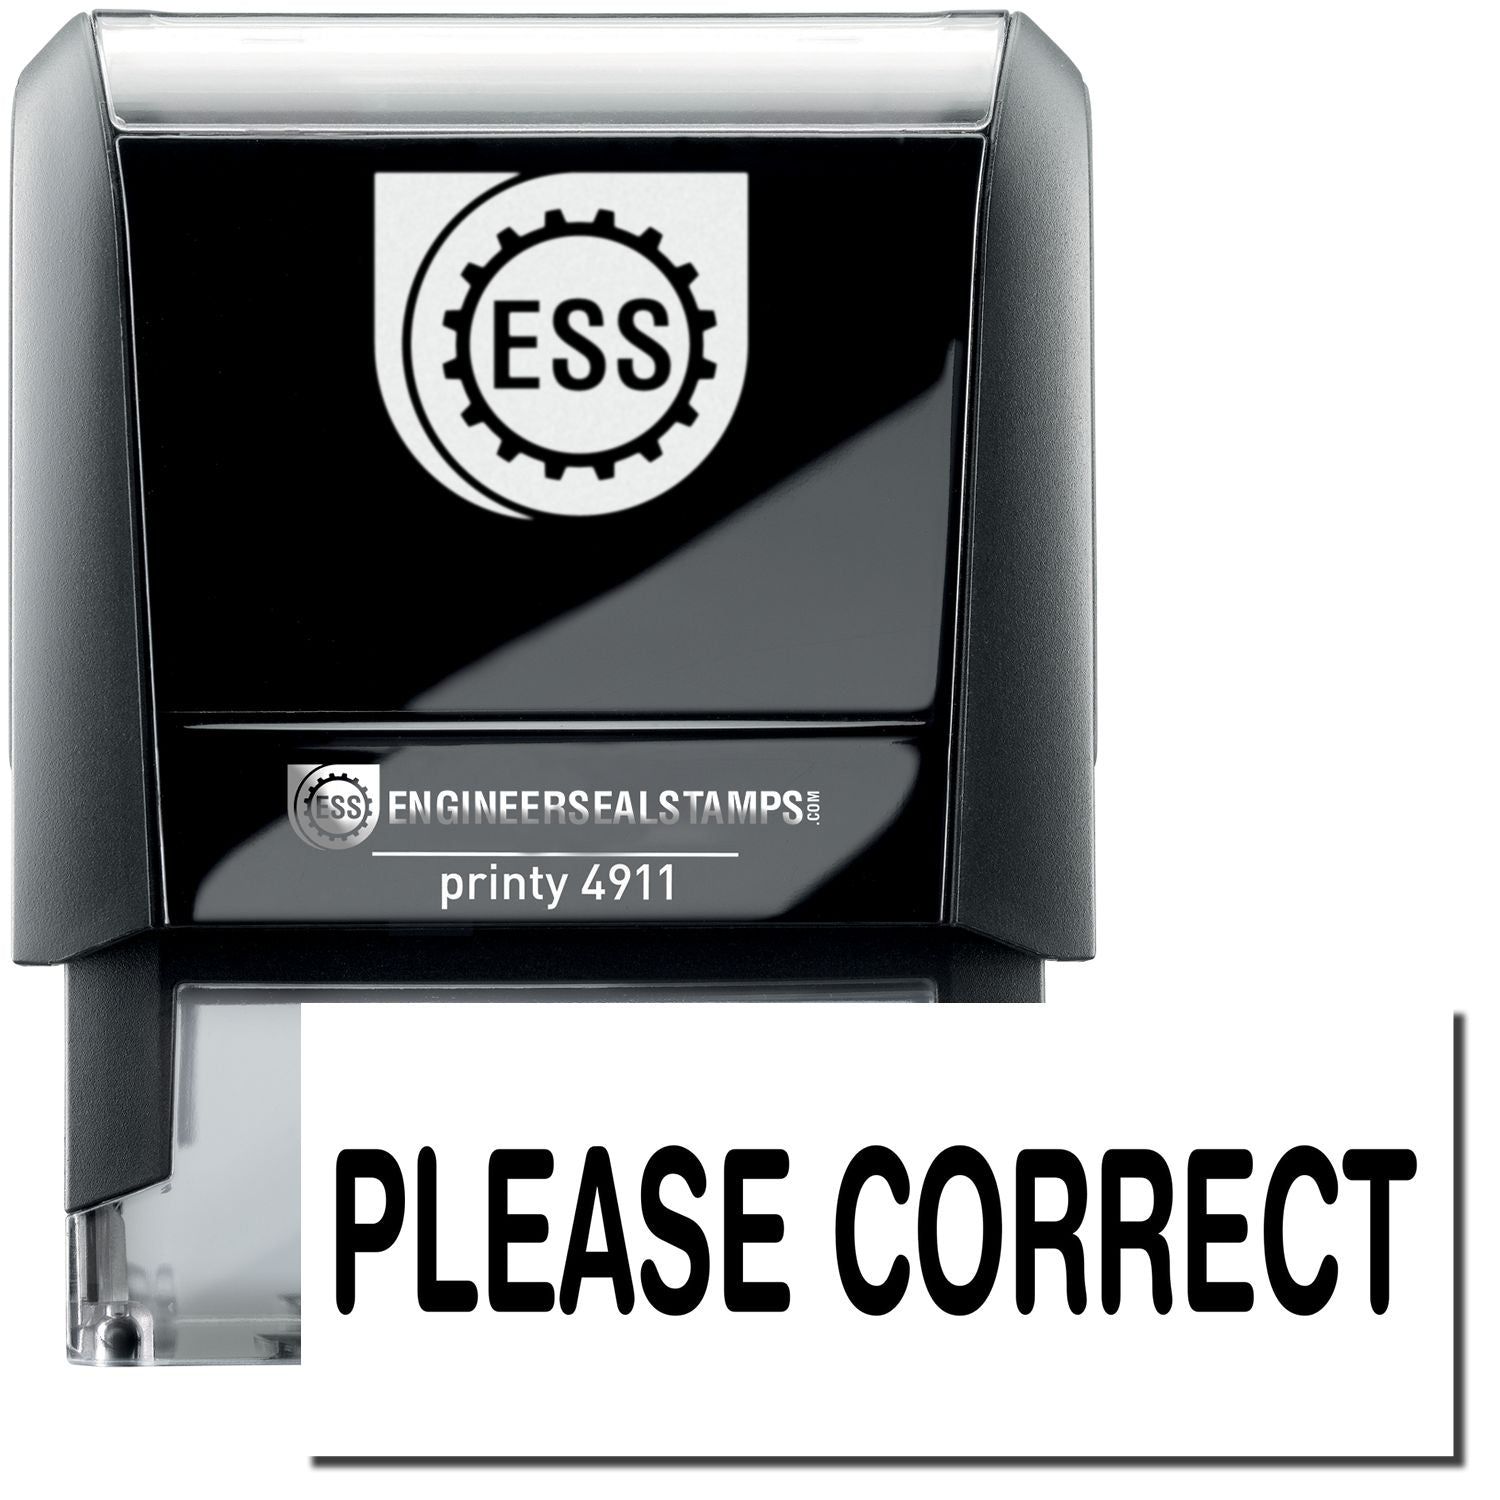 A self-inking stamp with a stamped image showing how the text "PLEASE CORRECT" is displayed after stamping.